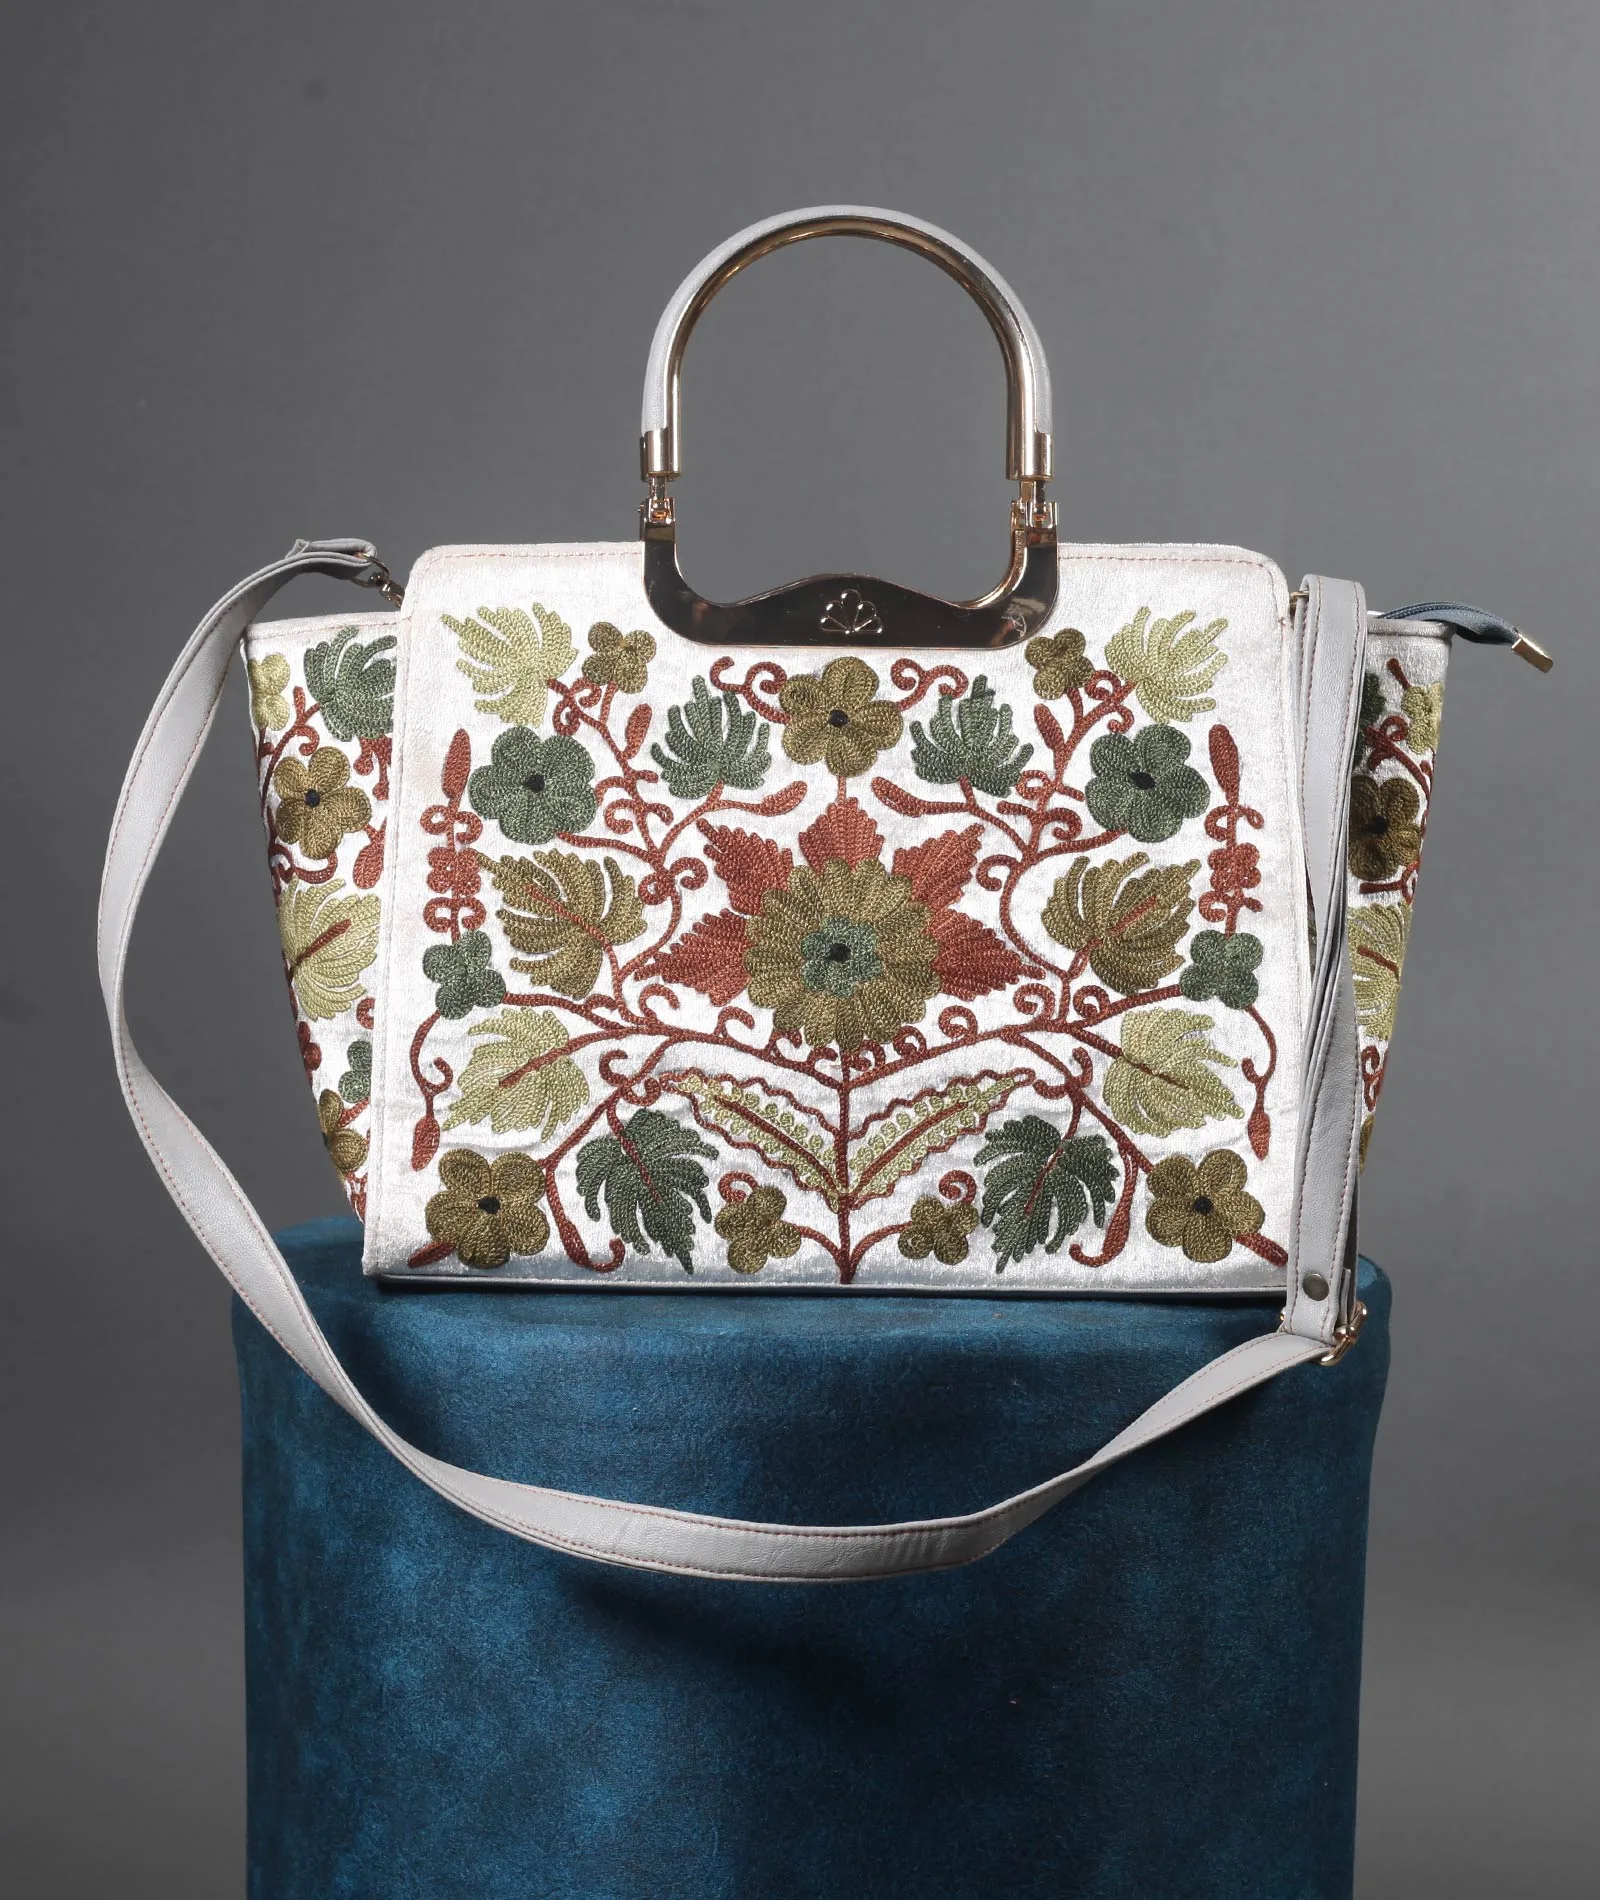 Floral Design Aari Embroidered White Hand Bag